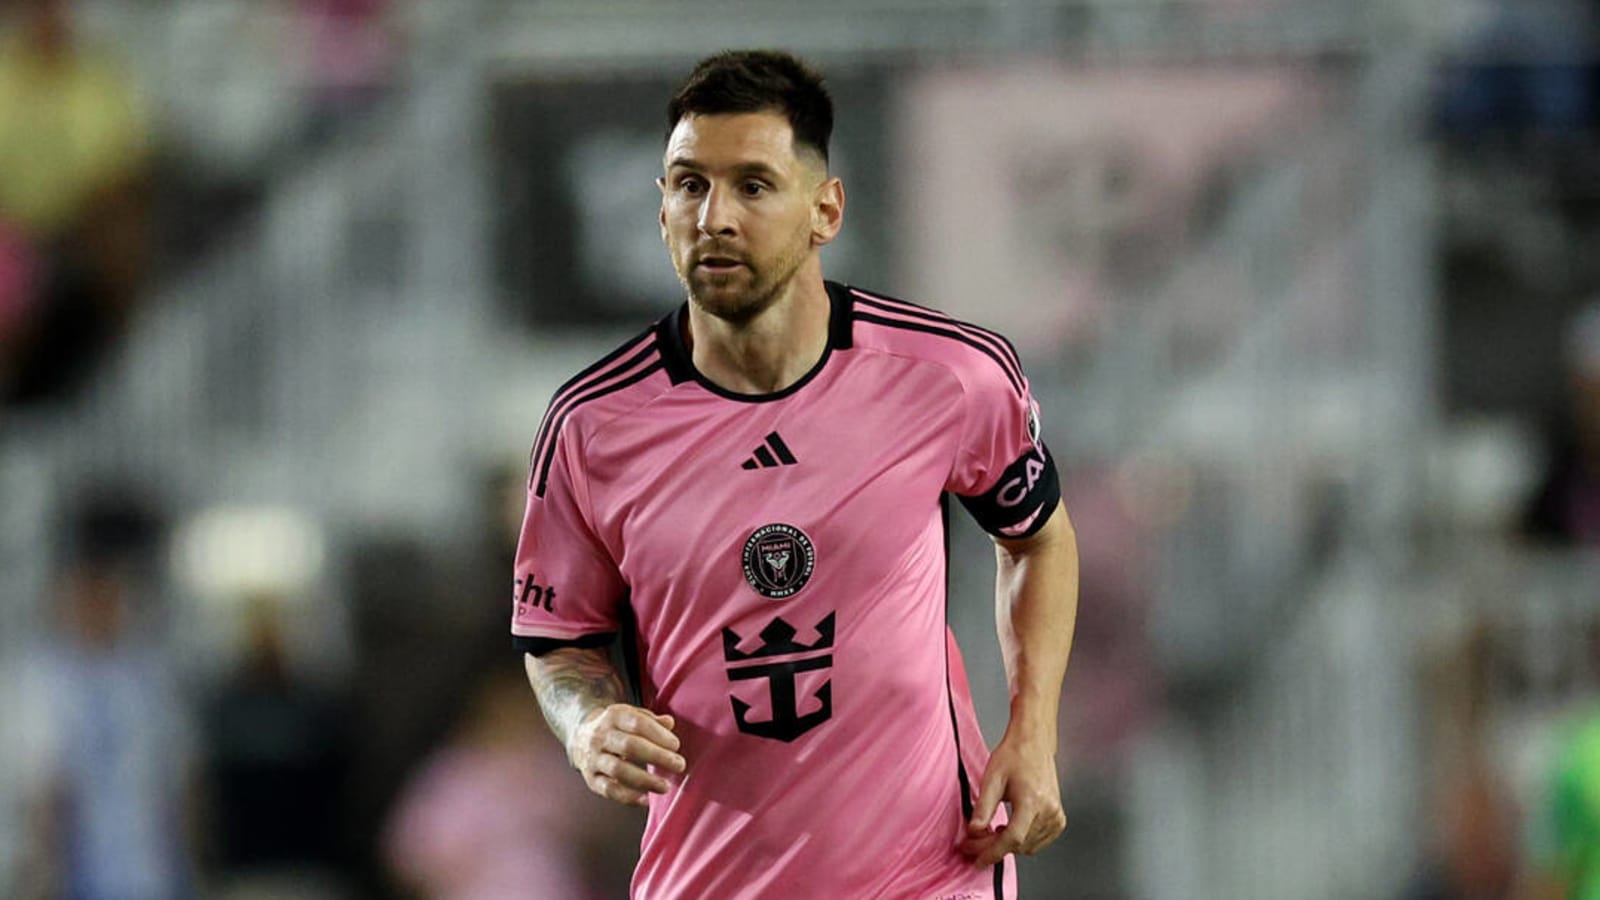 Lionel Messi sets MLS record with monster game